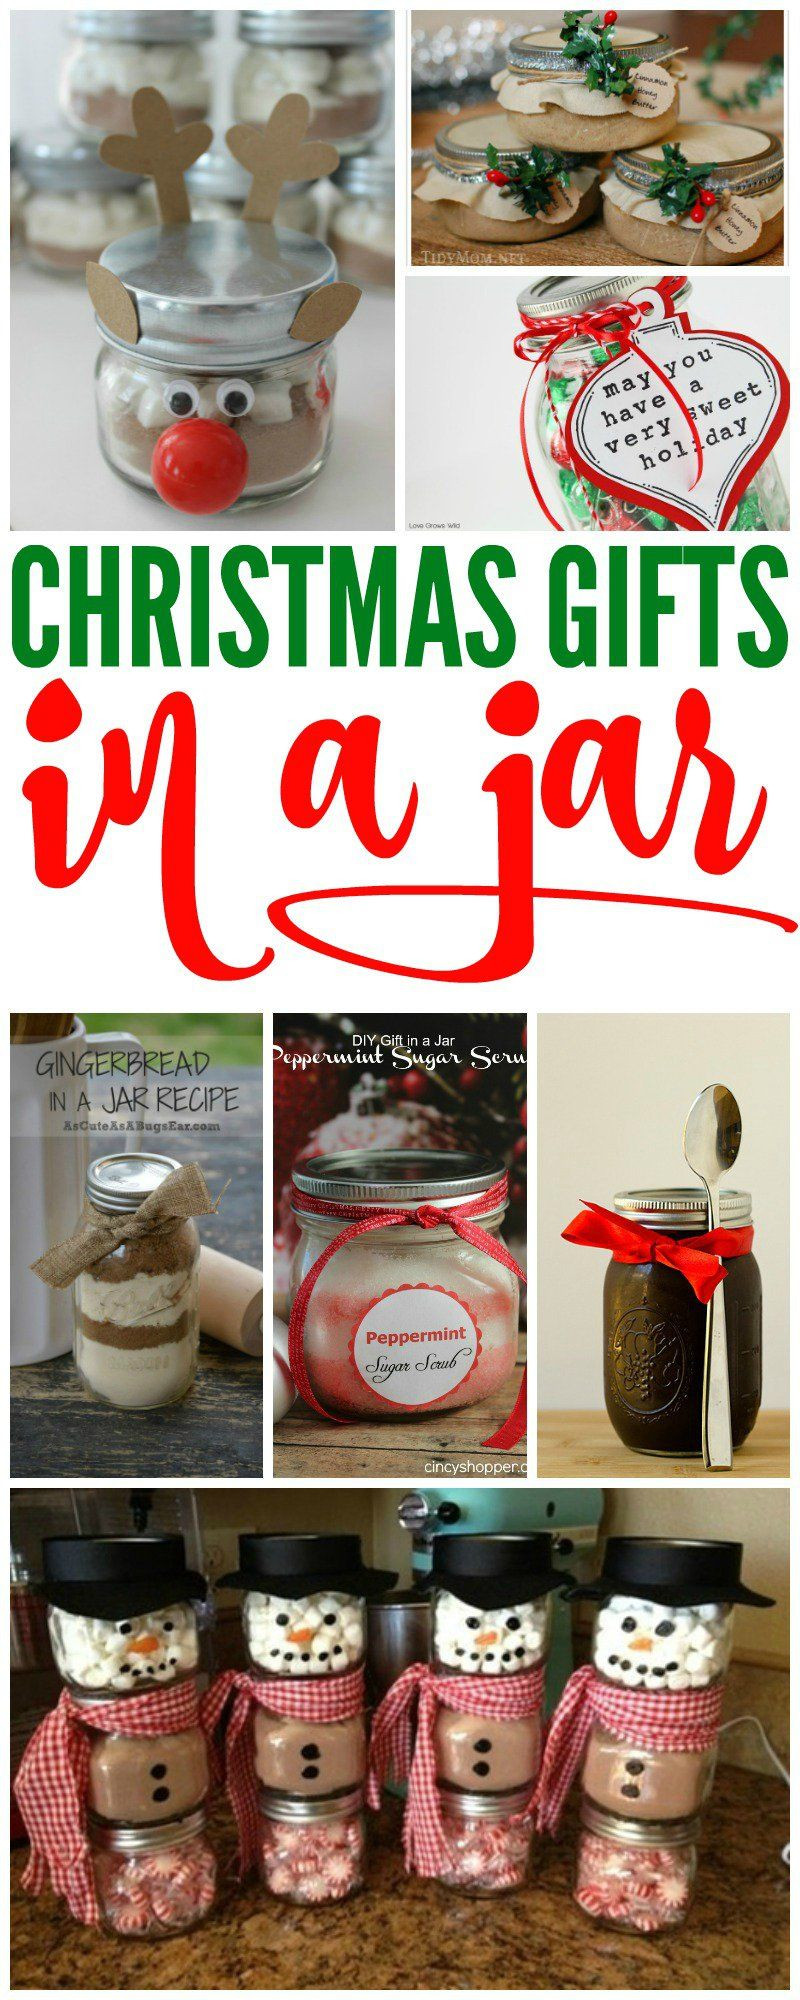 Cheap Christmas Gift Ideas For Family
 Christmas Gift in Jars If you are looking for Cheap